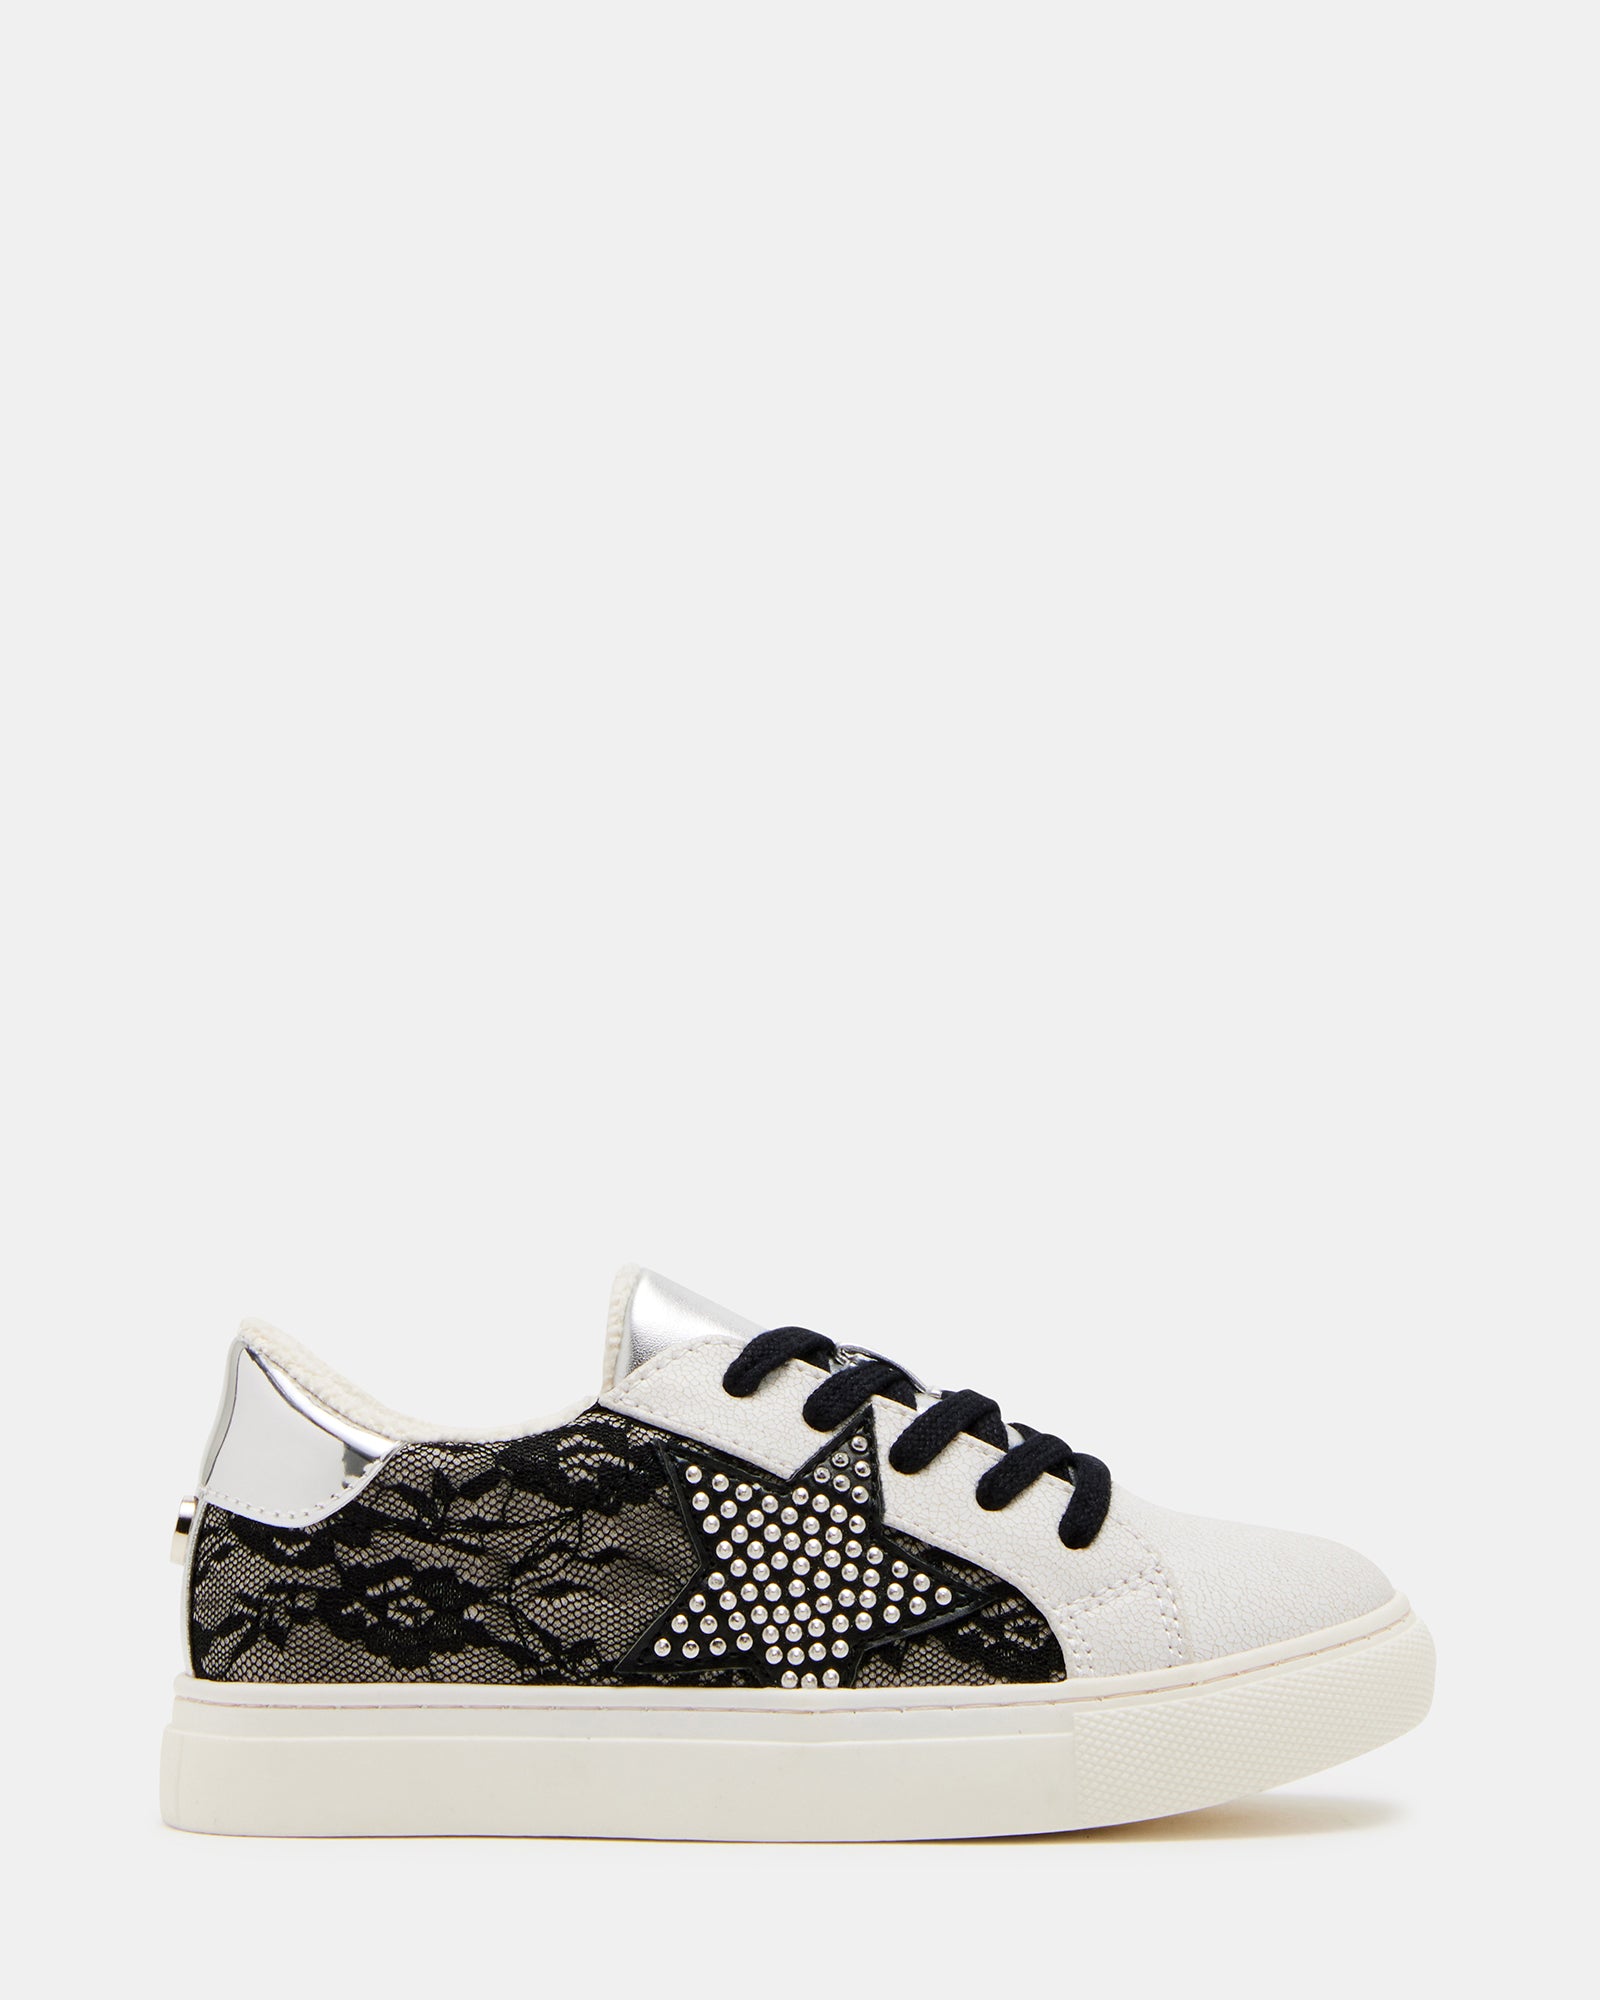 Kids' REZUME Black Lace Lace-Up Star Sneakers | Girls' Shoes